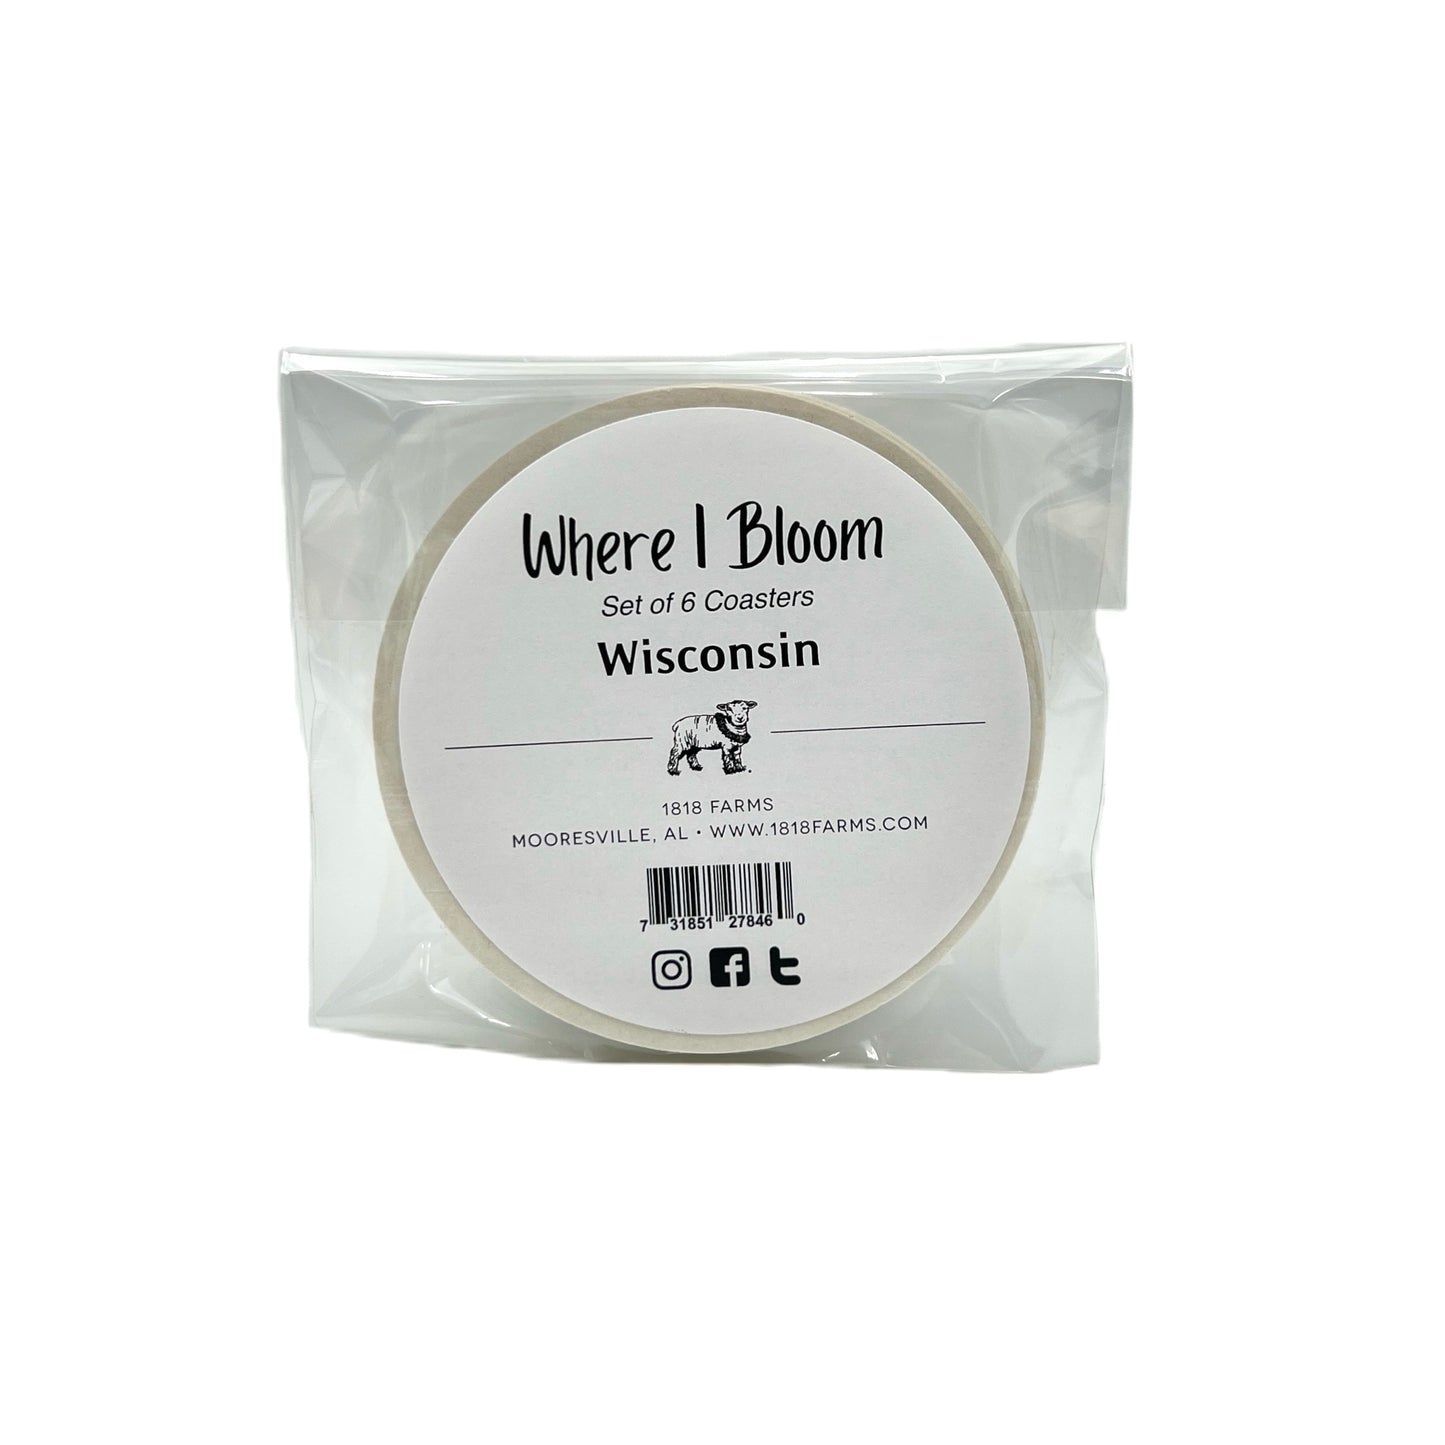 Wisconsin Themed Coasters (Set of 6)  - "Where I Bloom" Collection Coaster 1818 Farms   